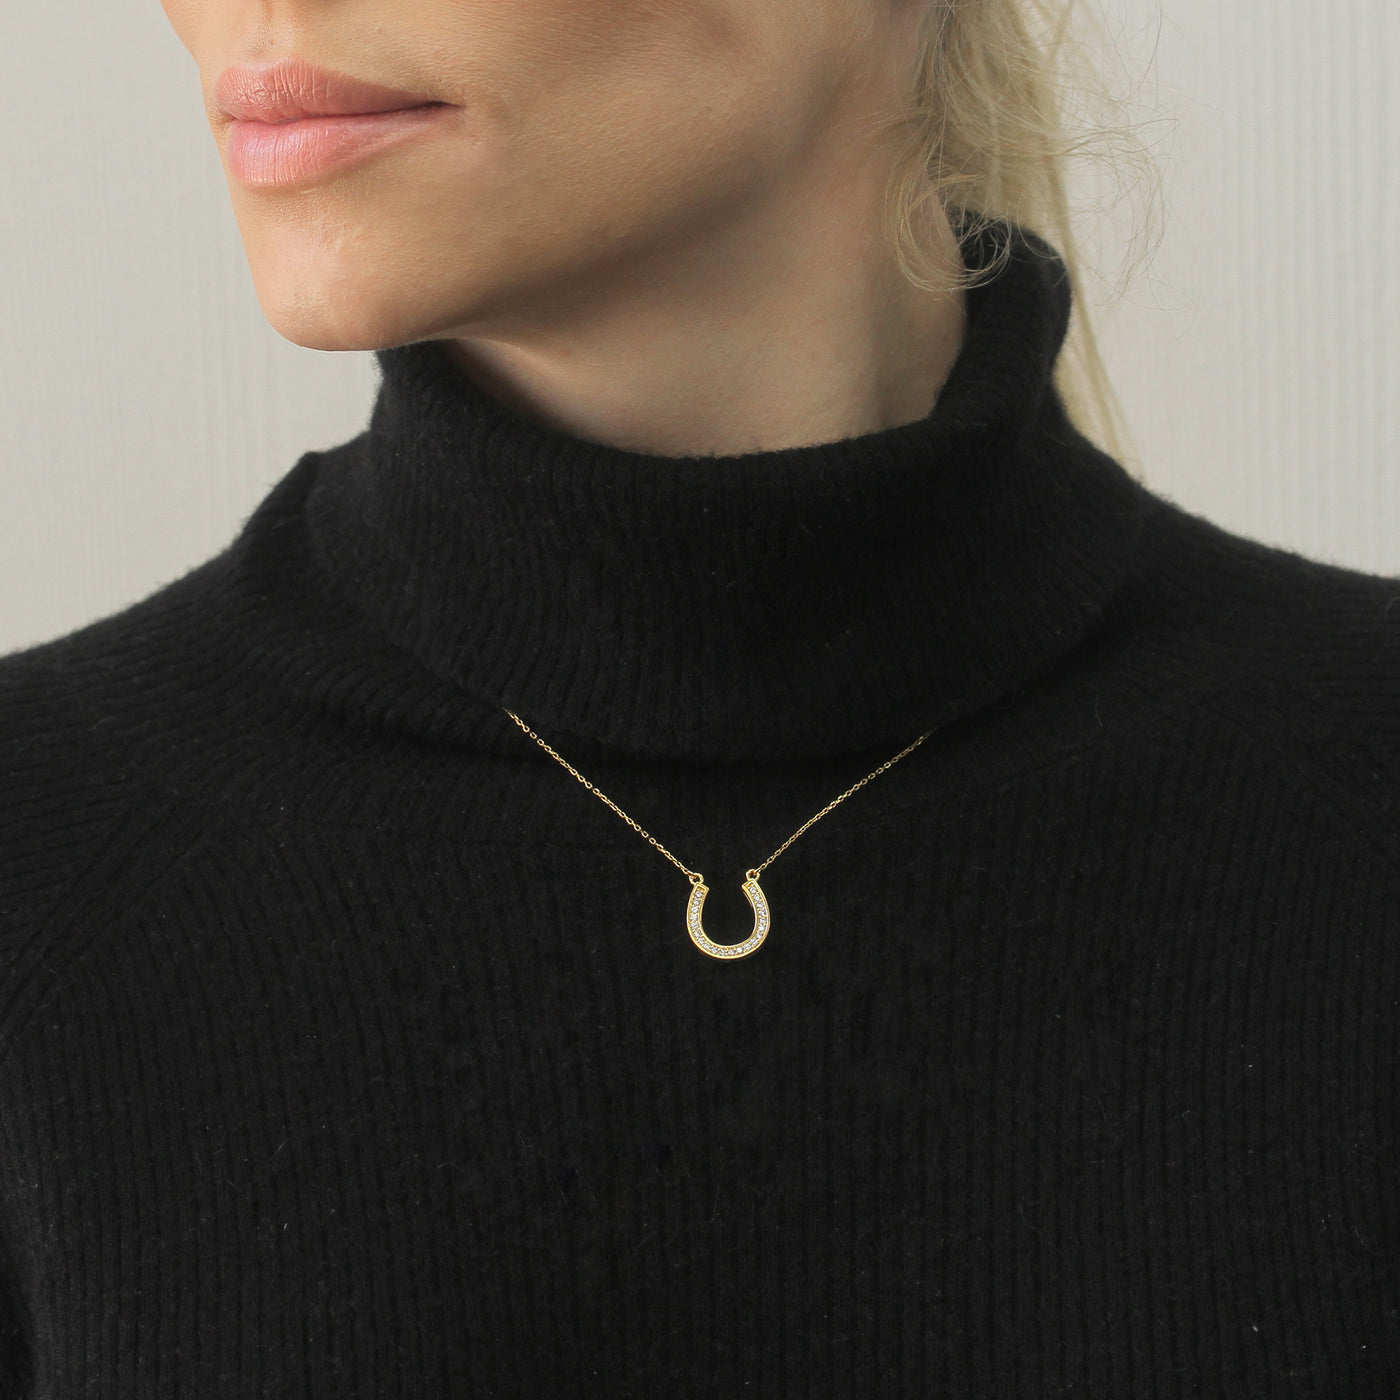 Horseshoe Necklace, 14K Gold Plated Sterling Silver Horse Shoe Pendant Chain Necklace